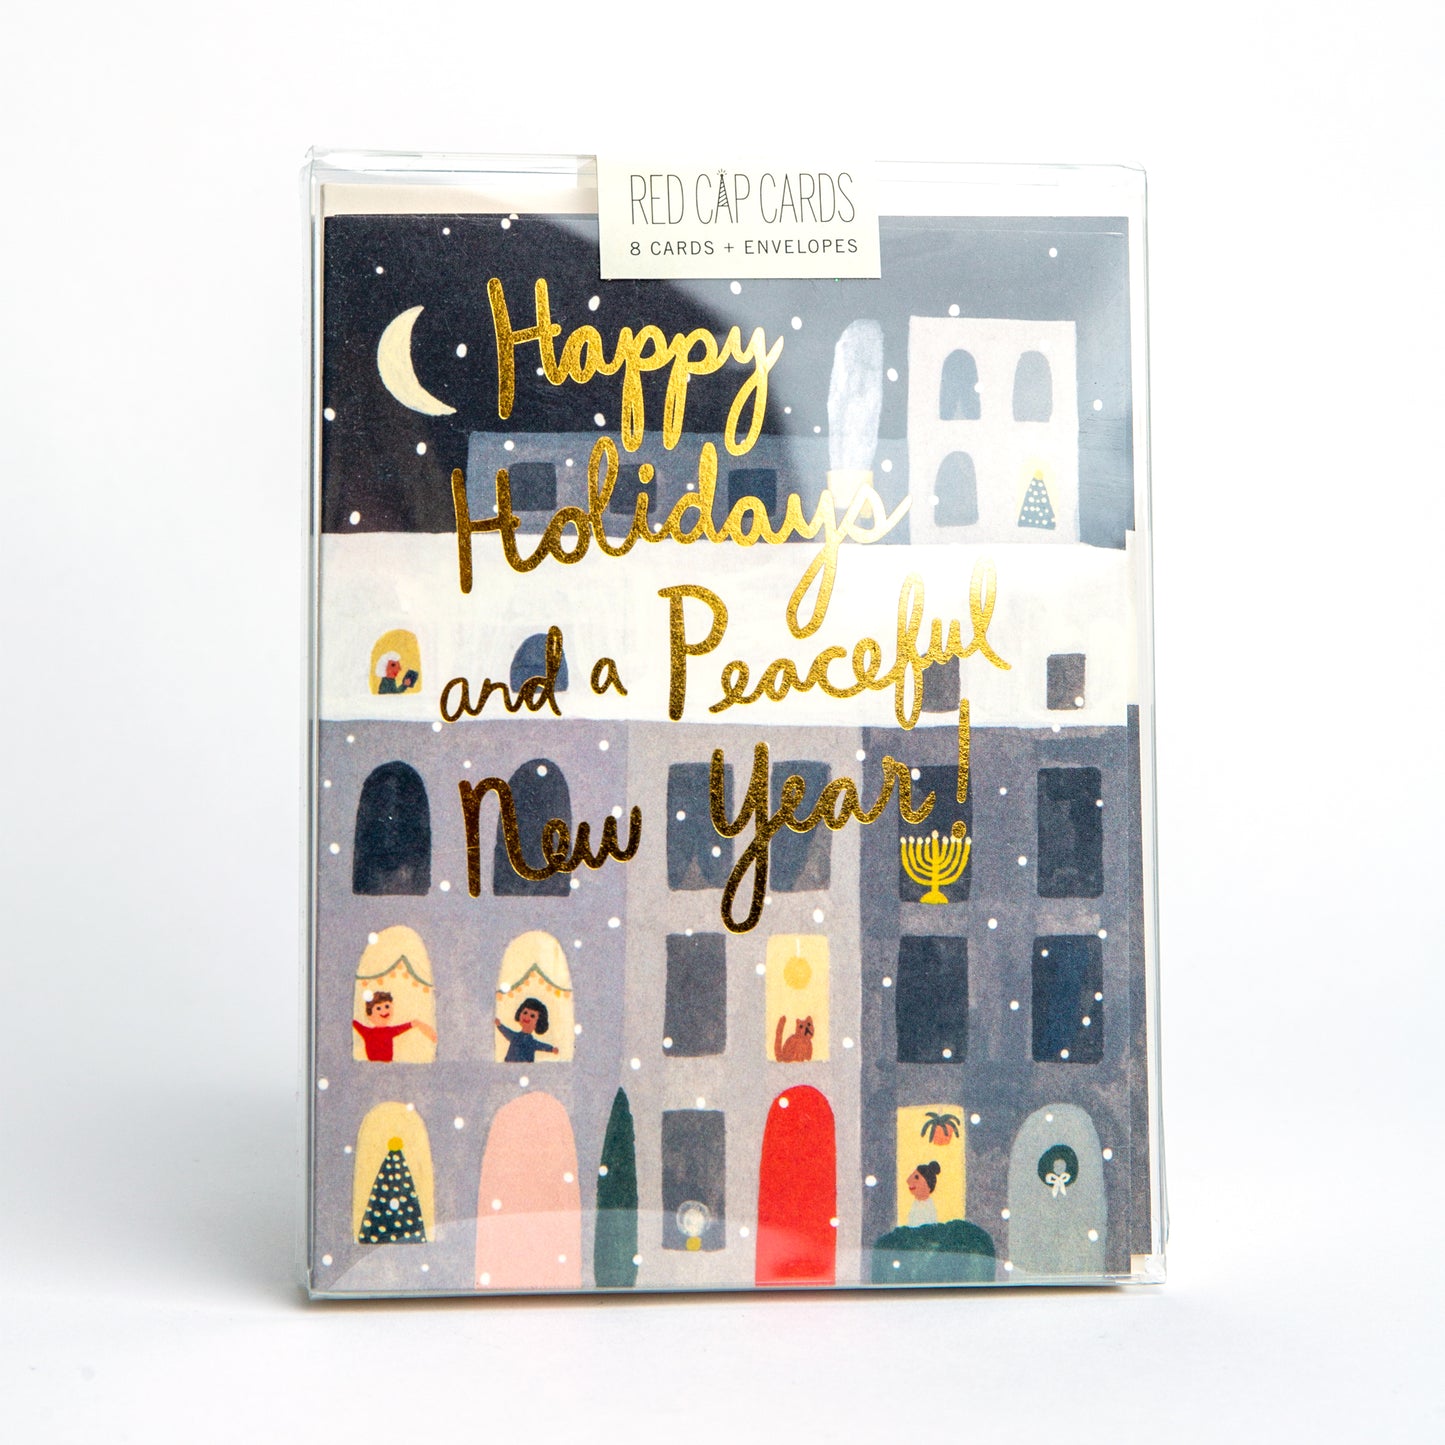 City Snow Holiday Card - Boxed Set of 8